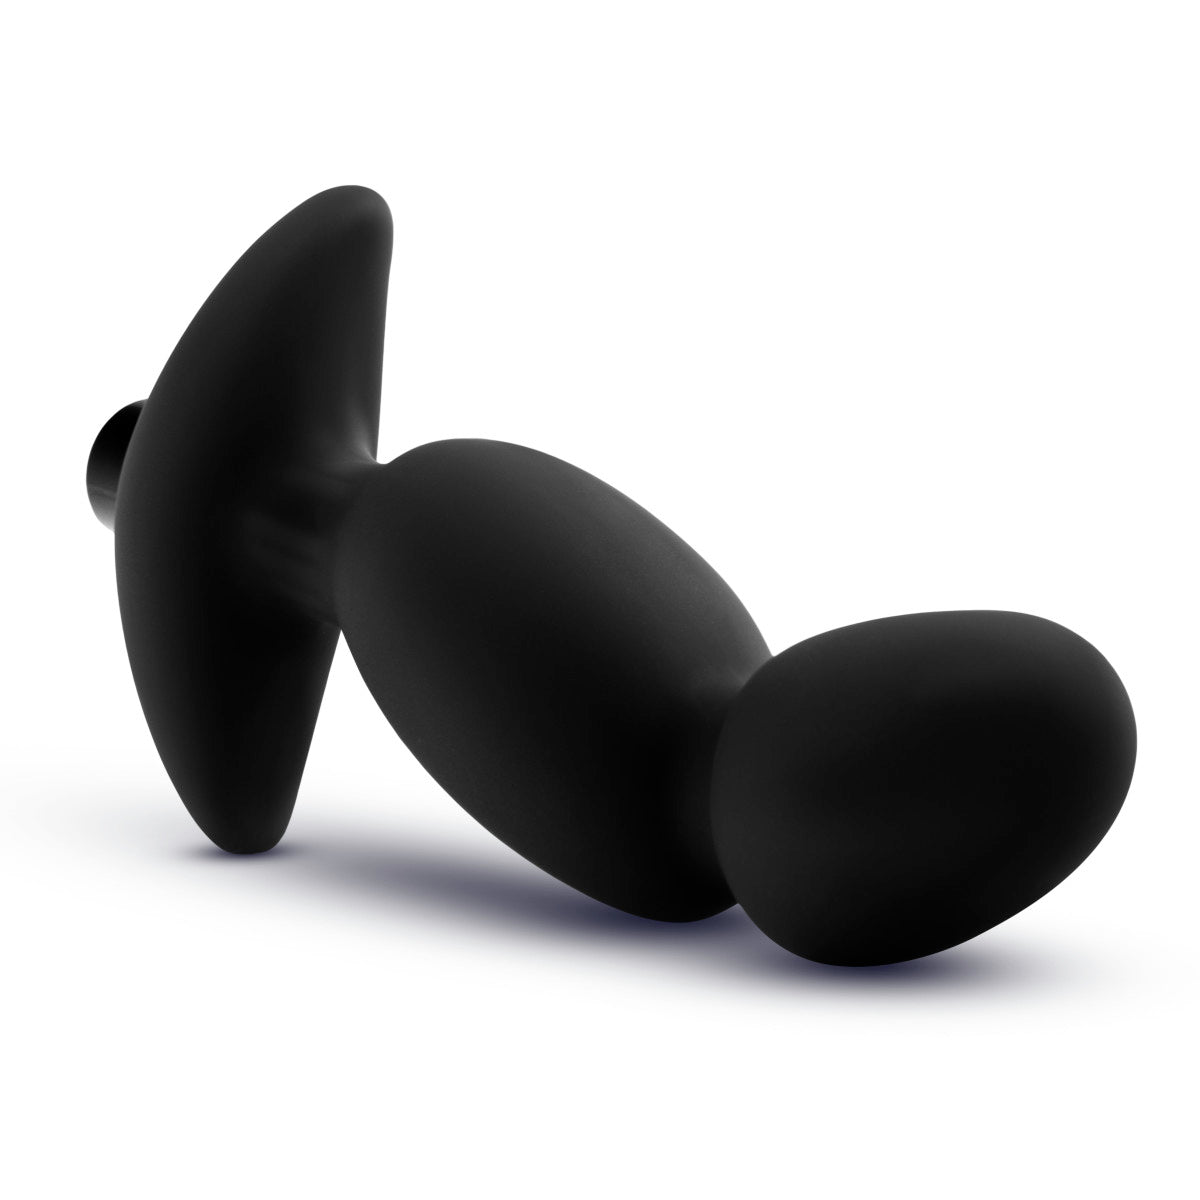 Anal Adventures Platinum Prostate Massager 04  Black 6.5-Inch Vibrating Rechargeable Anal Plug